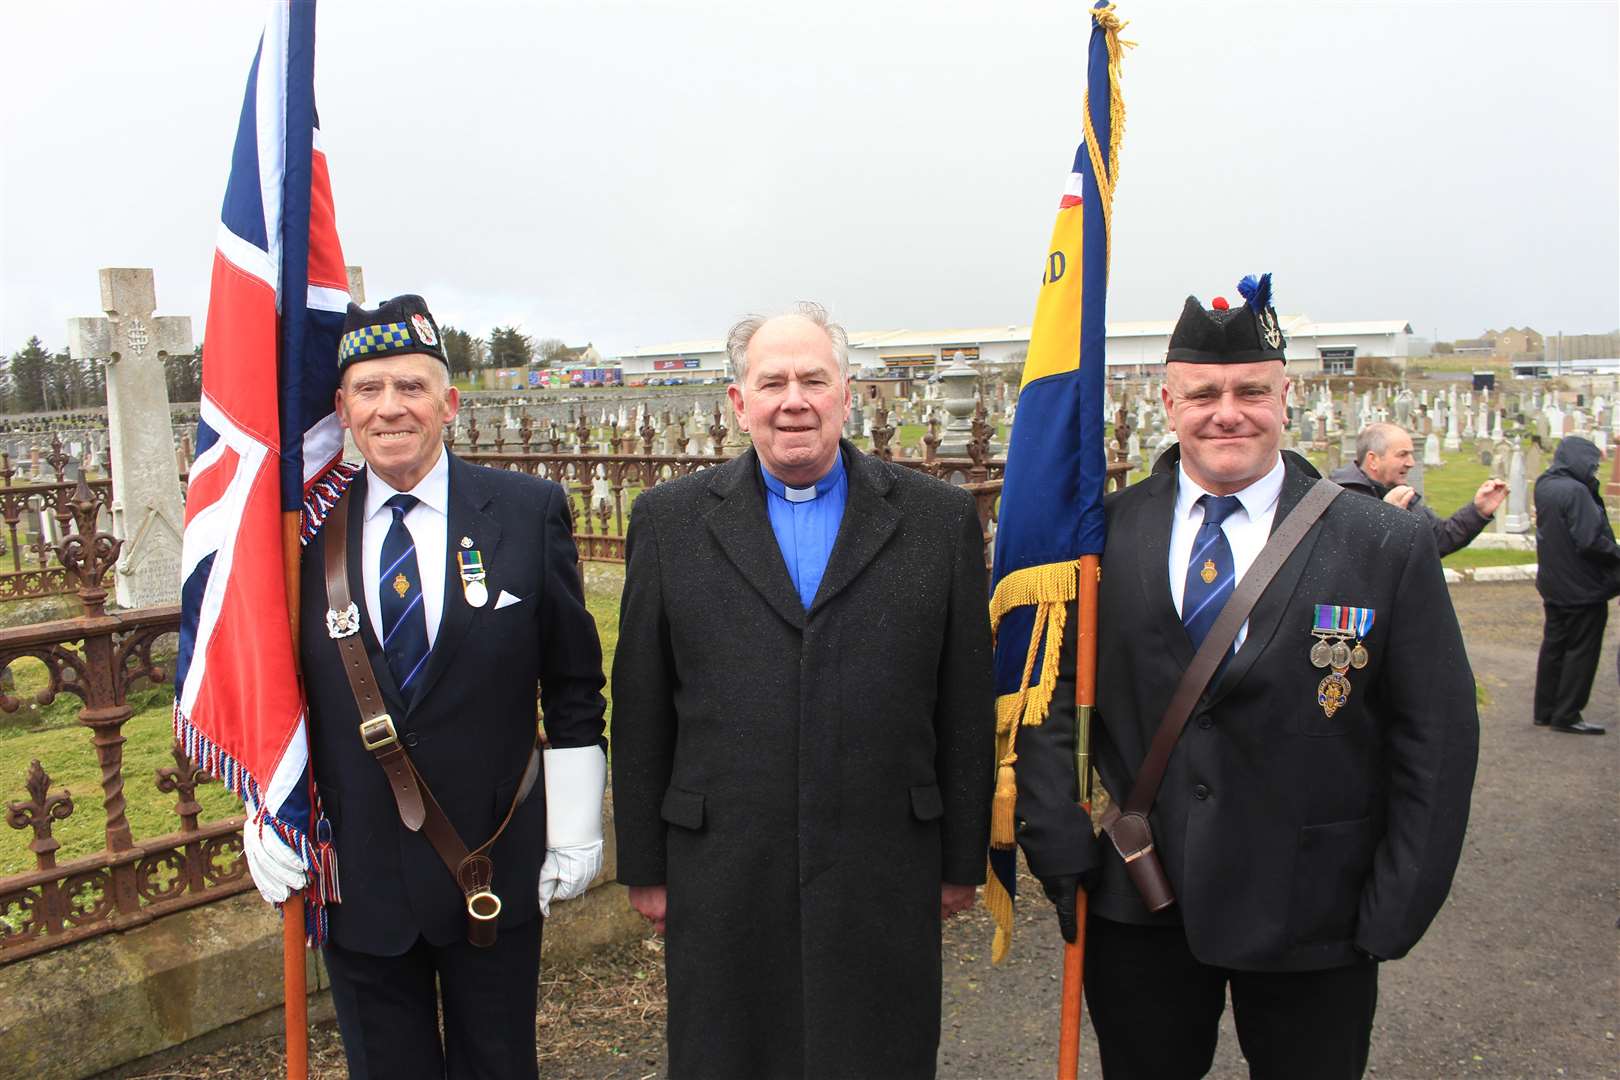 The Rev Lyall Rennie with the Legion branch colour party, Alex Paterson (left) and Kev Stewart. Picture: Alan Hendry